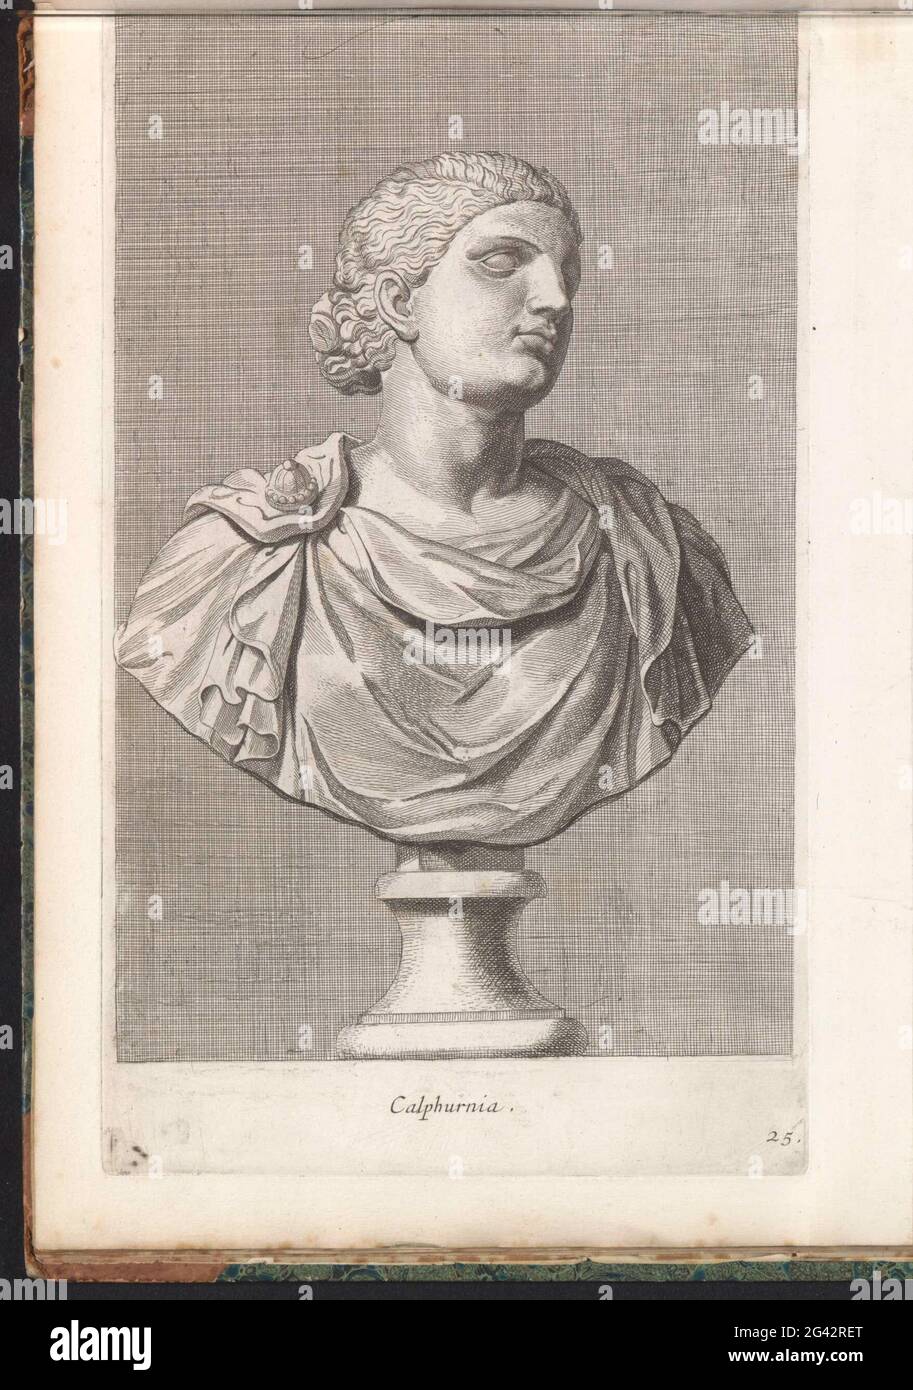 Bust of Calpurnia Pisonis; Calphurnia. Classic bust of a woman. The print is part of an album with a series of prints to the sculptures in the collection of Gerard Reynst. Stock Photo